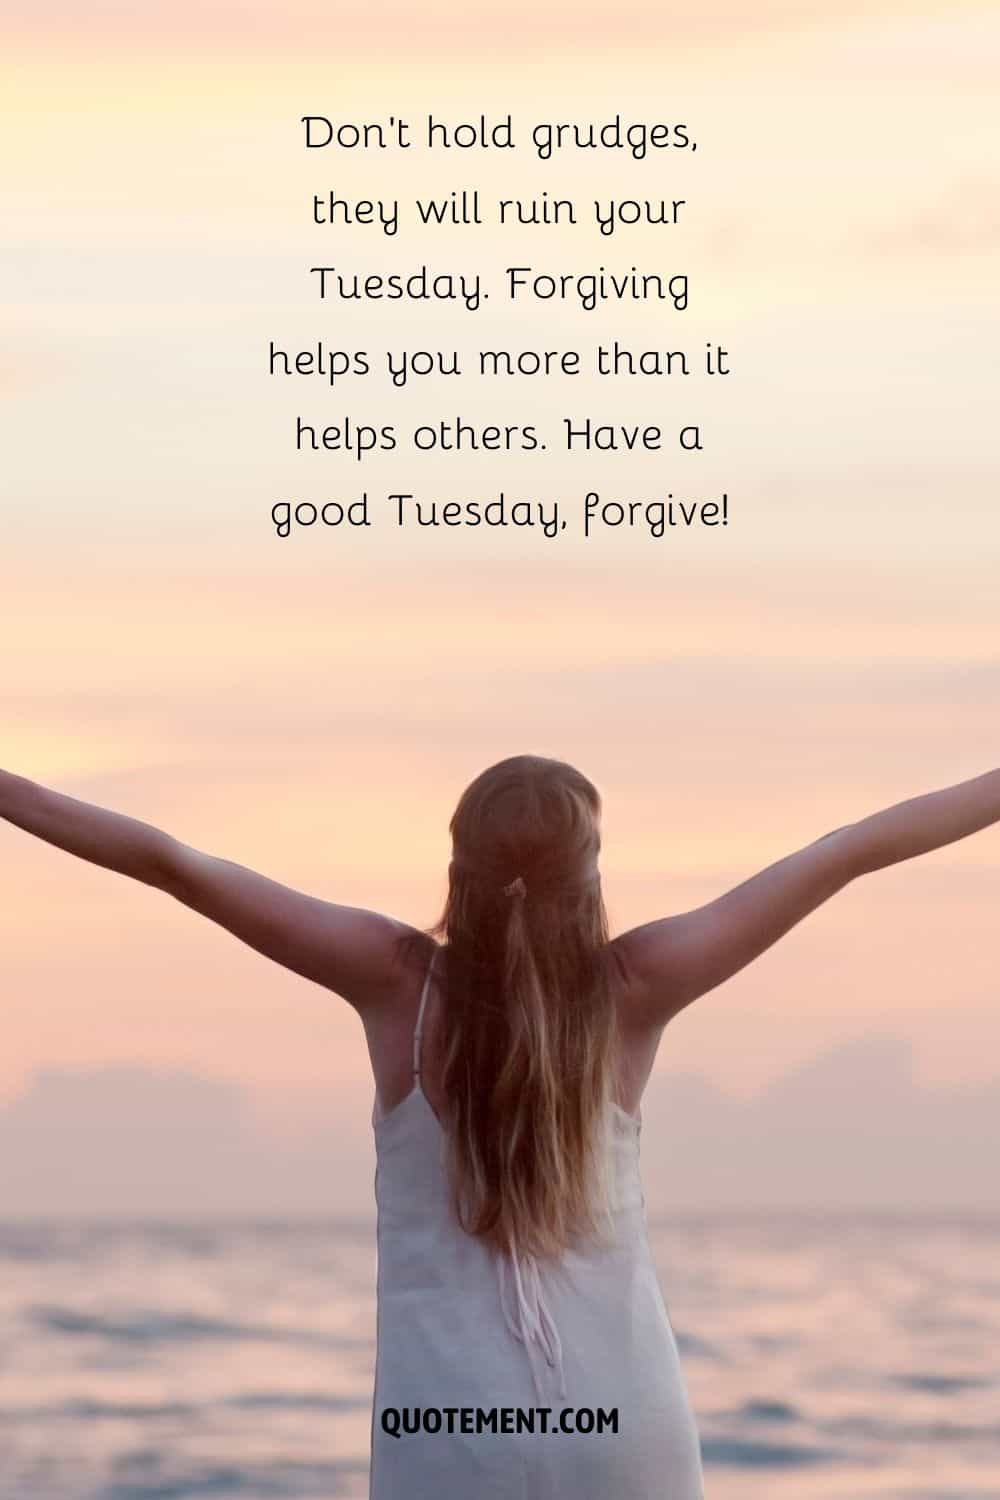 “Don’t hold grudges, they will ruin your Tuesday. Forgiving helps you more than it helps others. Have a good Tuesday, forgive!” — Unknown